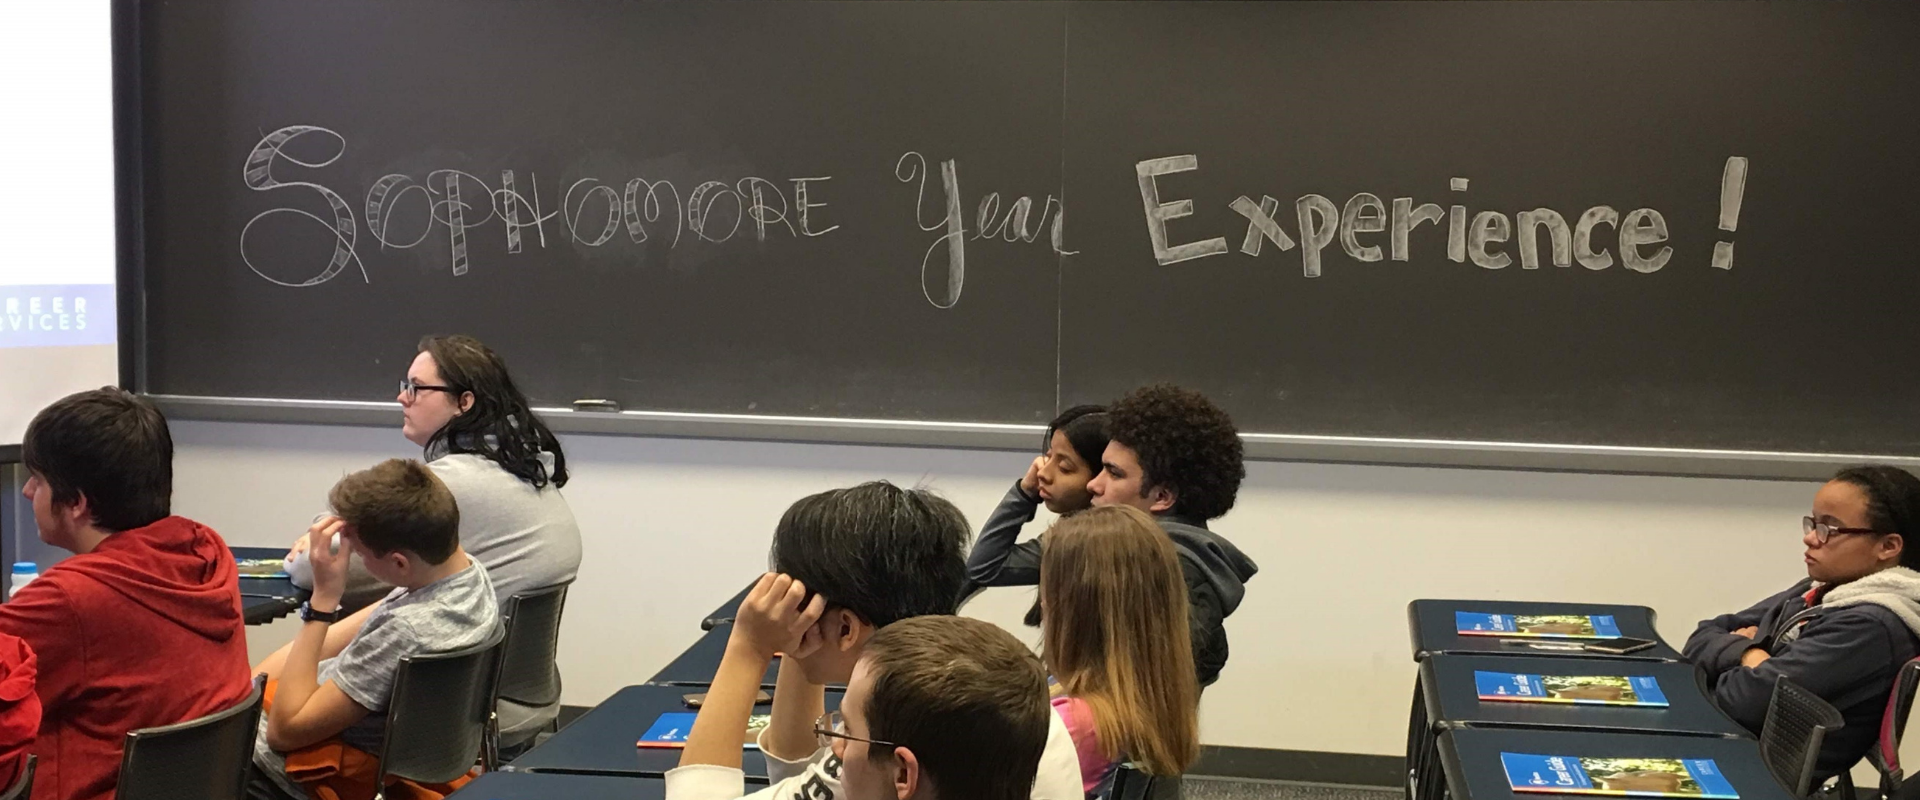 students sitting in classroom; "Sophomore Year Experience" handwritten on chalkboard